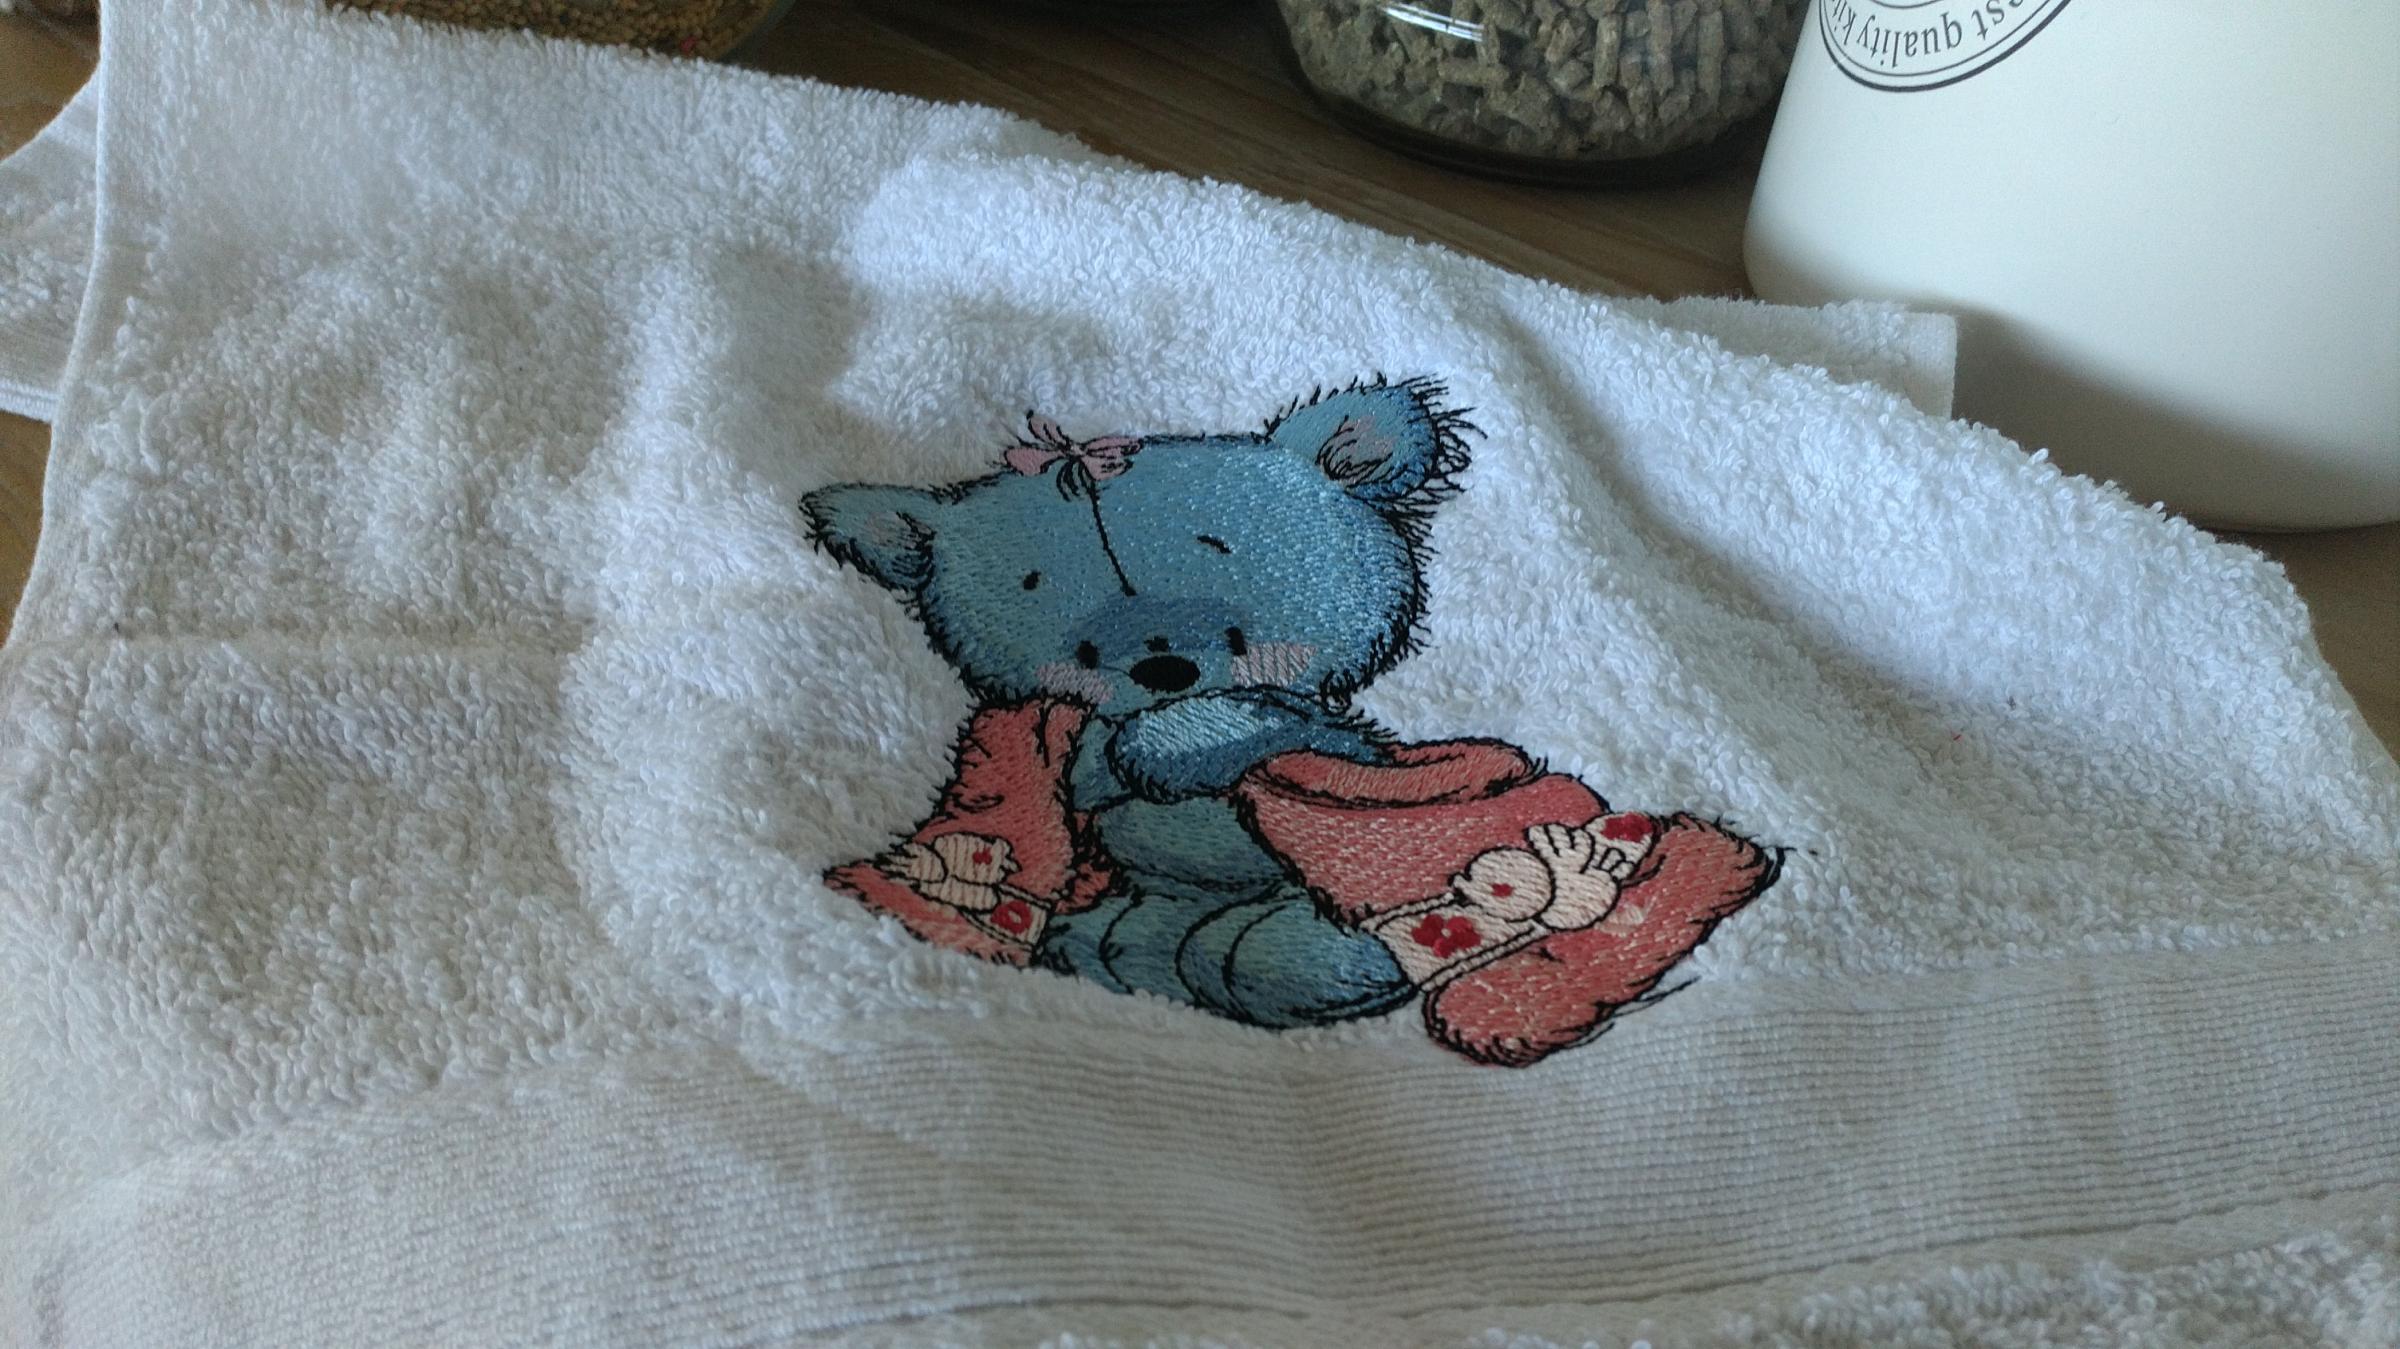 Embroidered towel with teddy bear after shower design